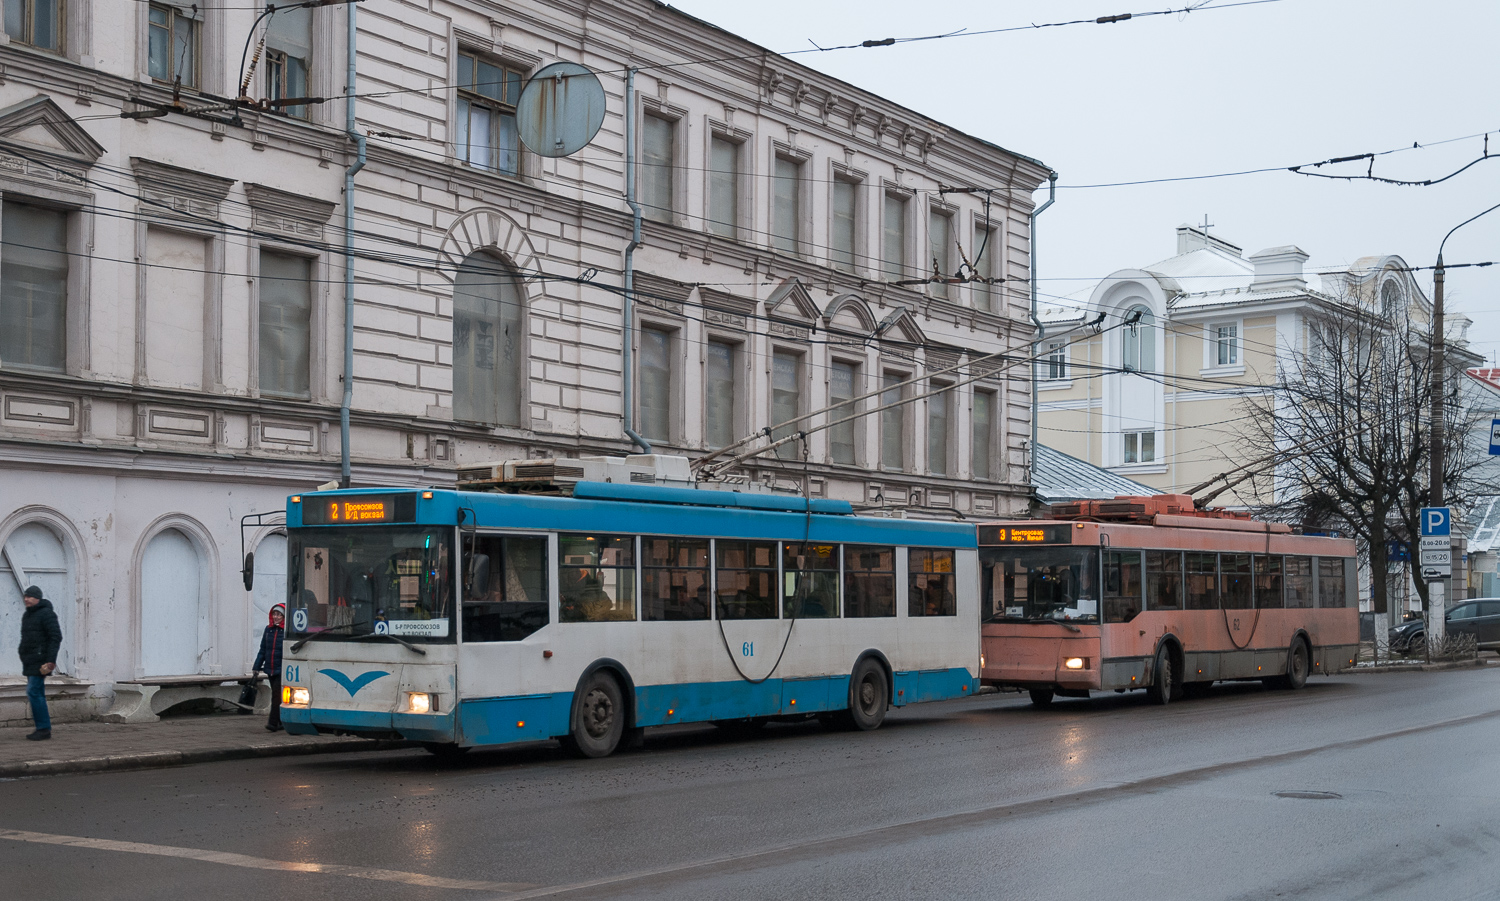 Tver, Trolza-5275.05 “Optima” — 61; Tver — Trolleybus lines: Central district